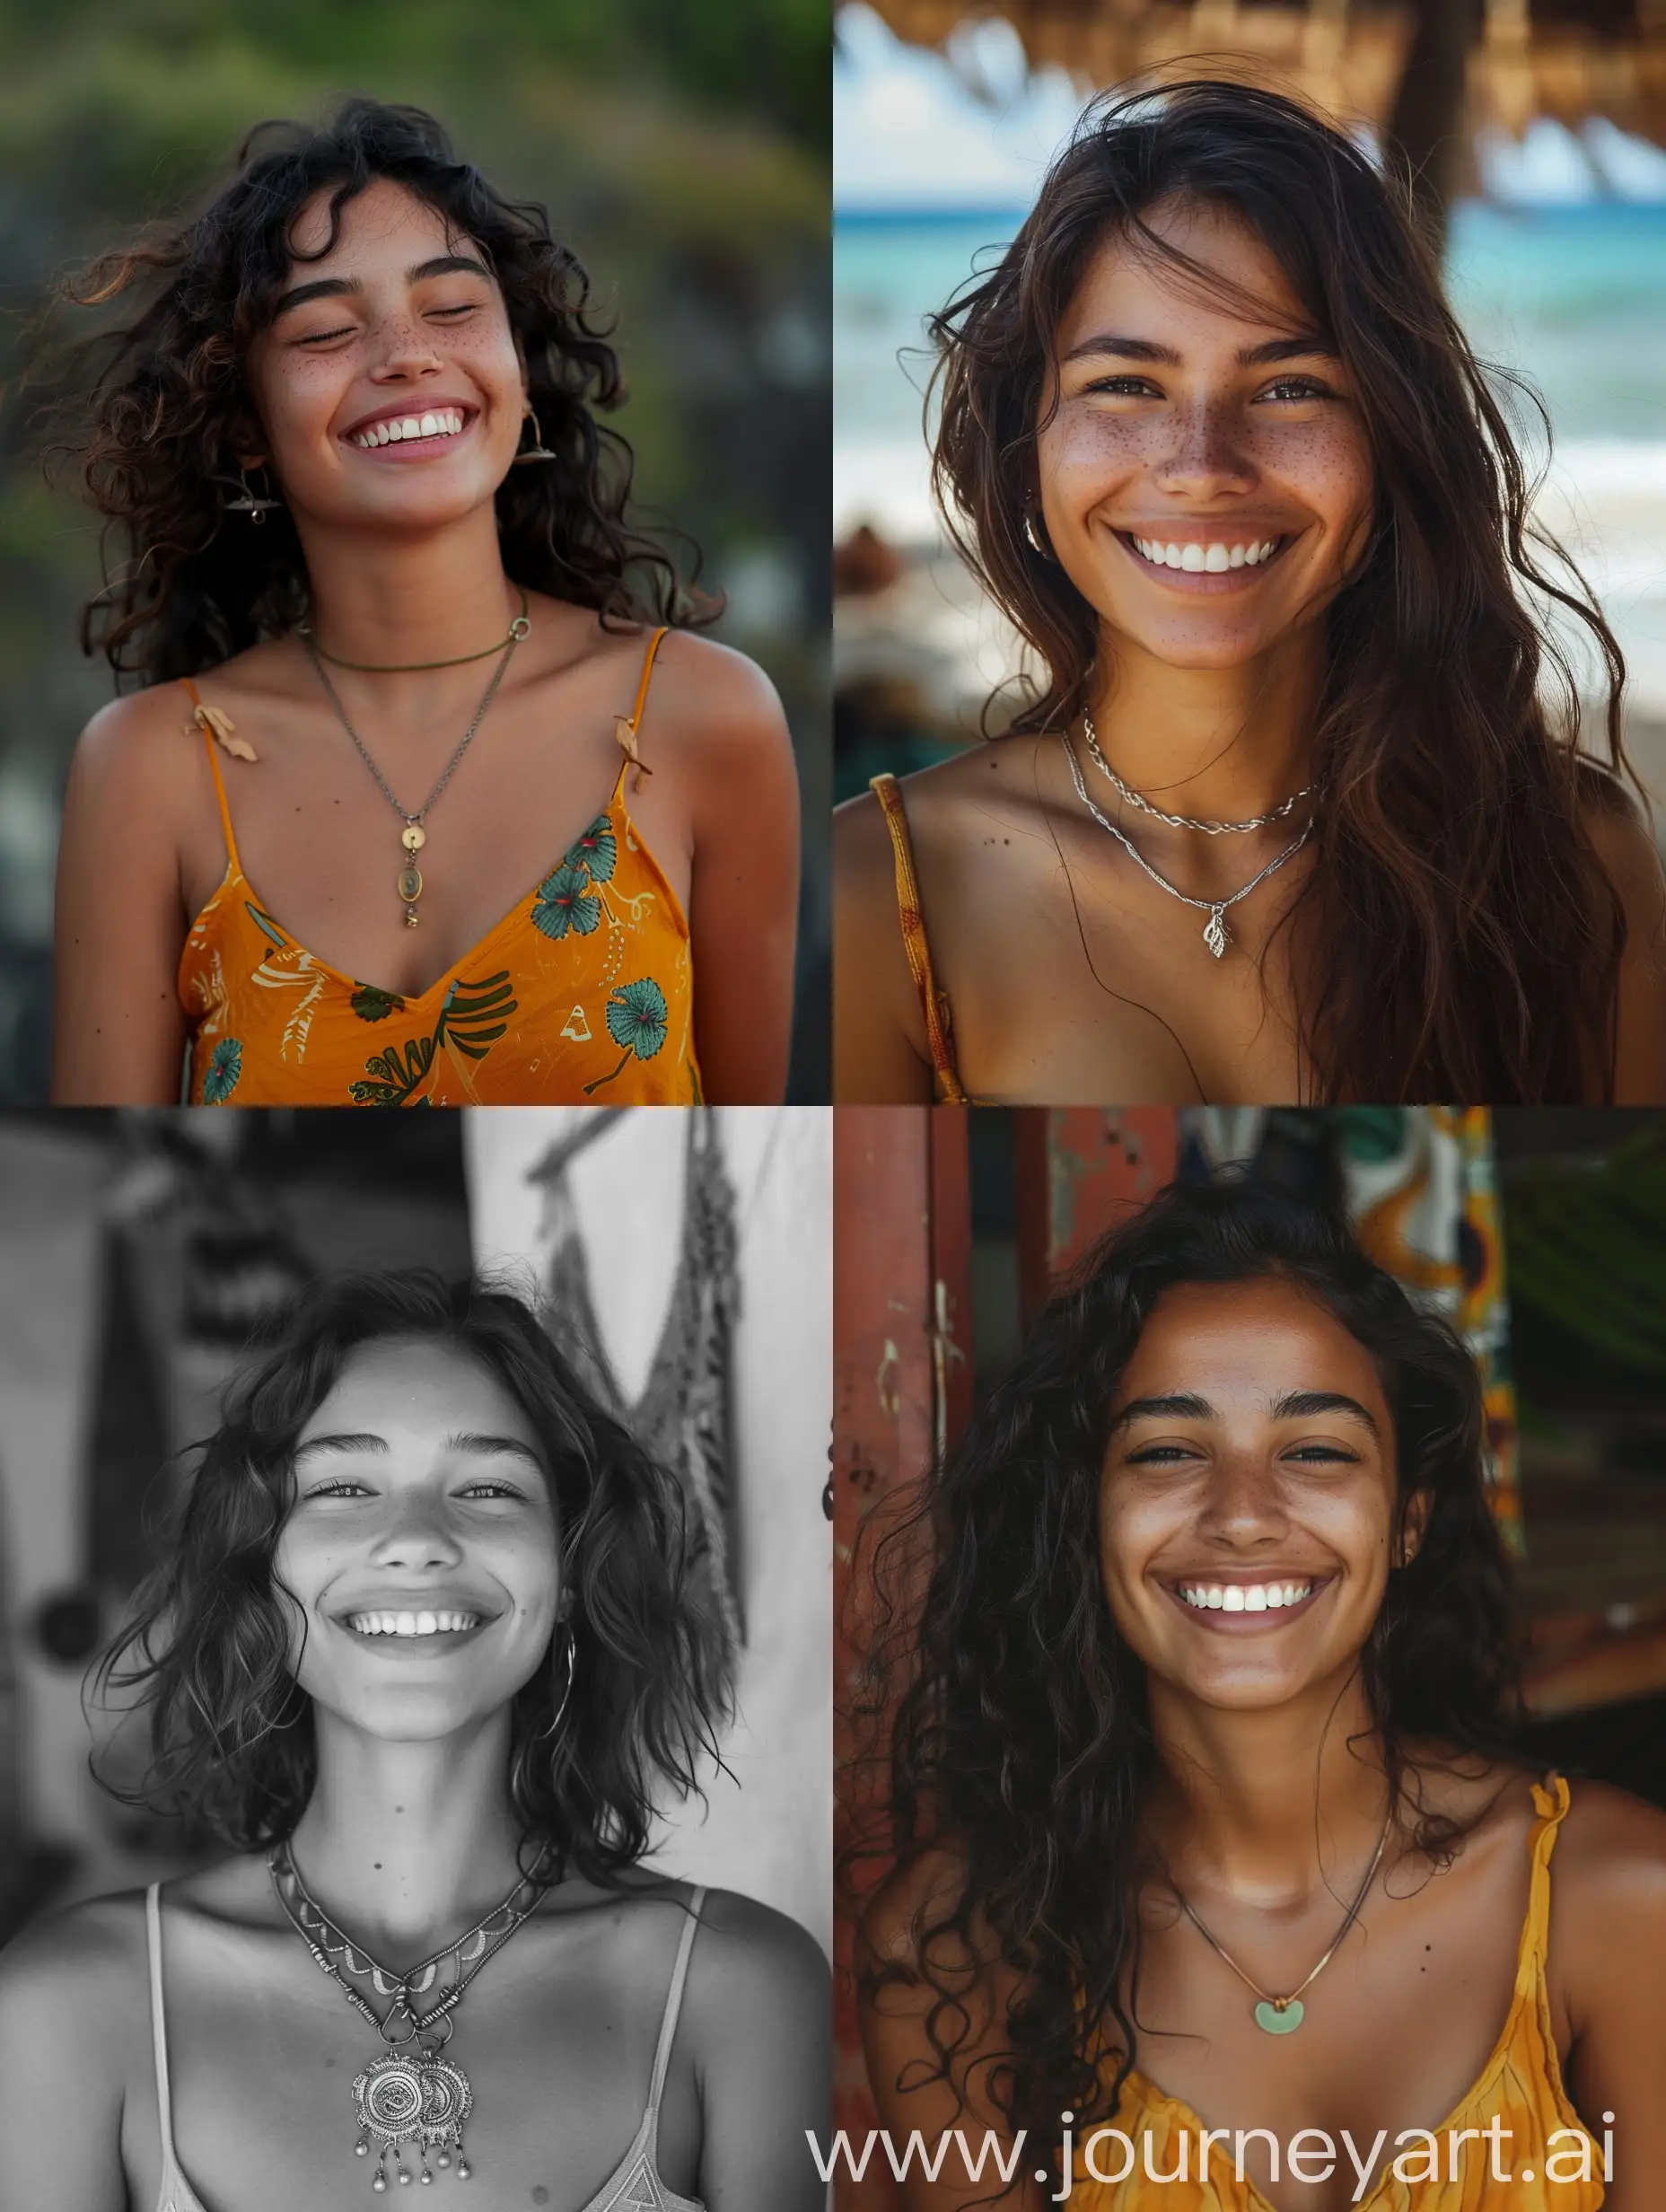 a girl smiling, in the style of reefwave, metalwork jewelry, goa-insprired motifs, eco-friendly craftsmanship, smooth and shiny, exotic, softly organic, dark hair, зфду 